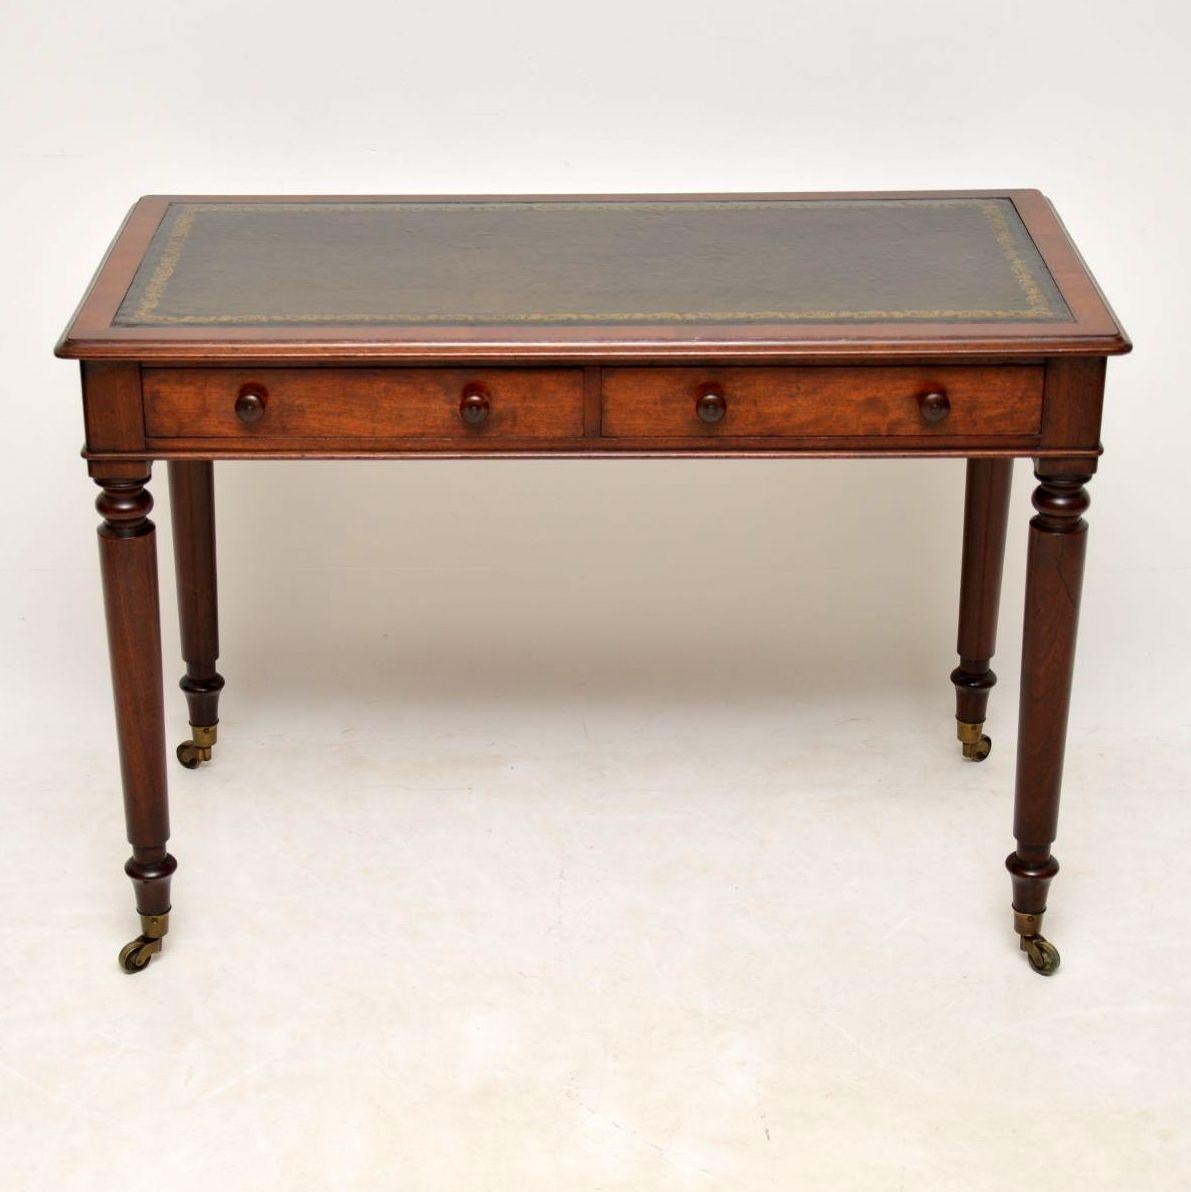 This antique Victorian leather top mahogany writing table is in good condition & dates to around the 1860-1880s period. It has a tooled leather writing surface, two drawers on the front with turned mahogany handles and a polished finished back. This